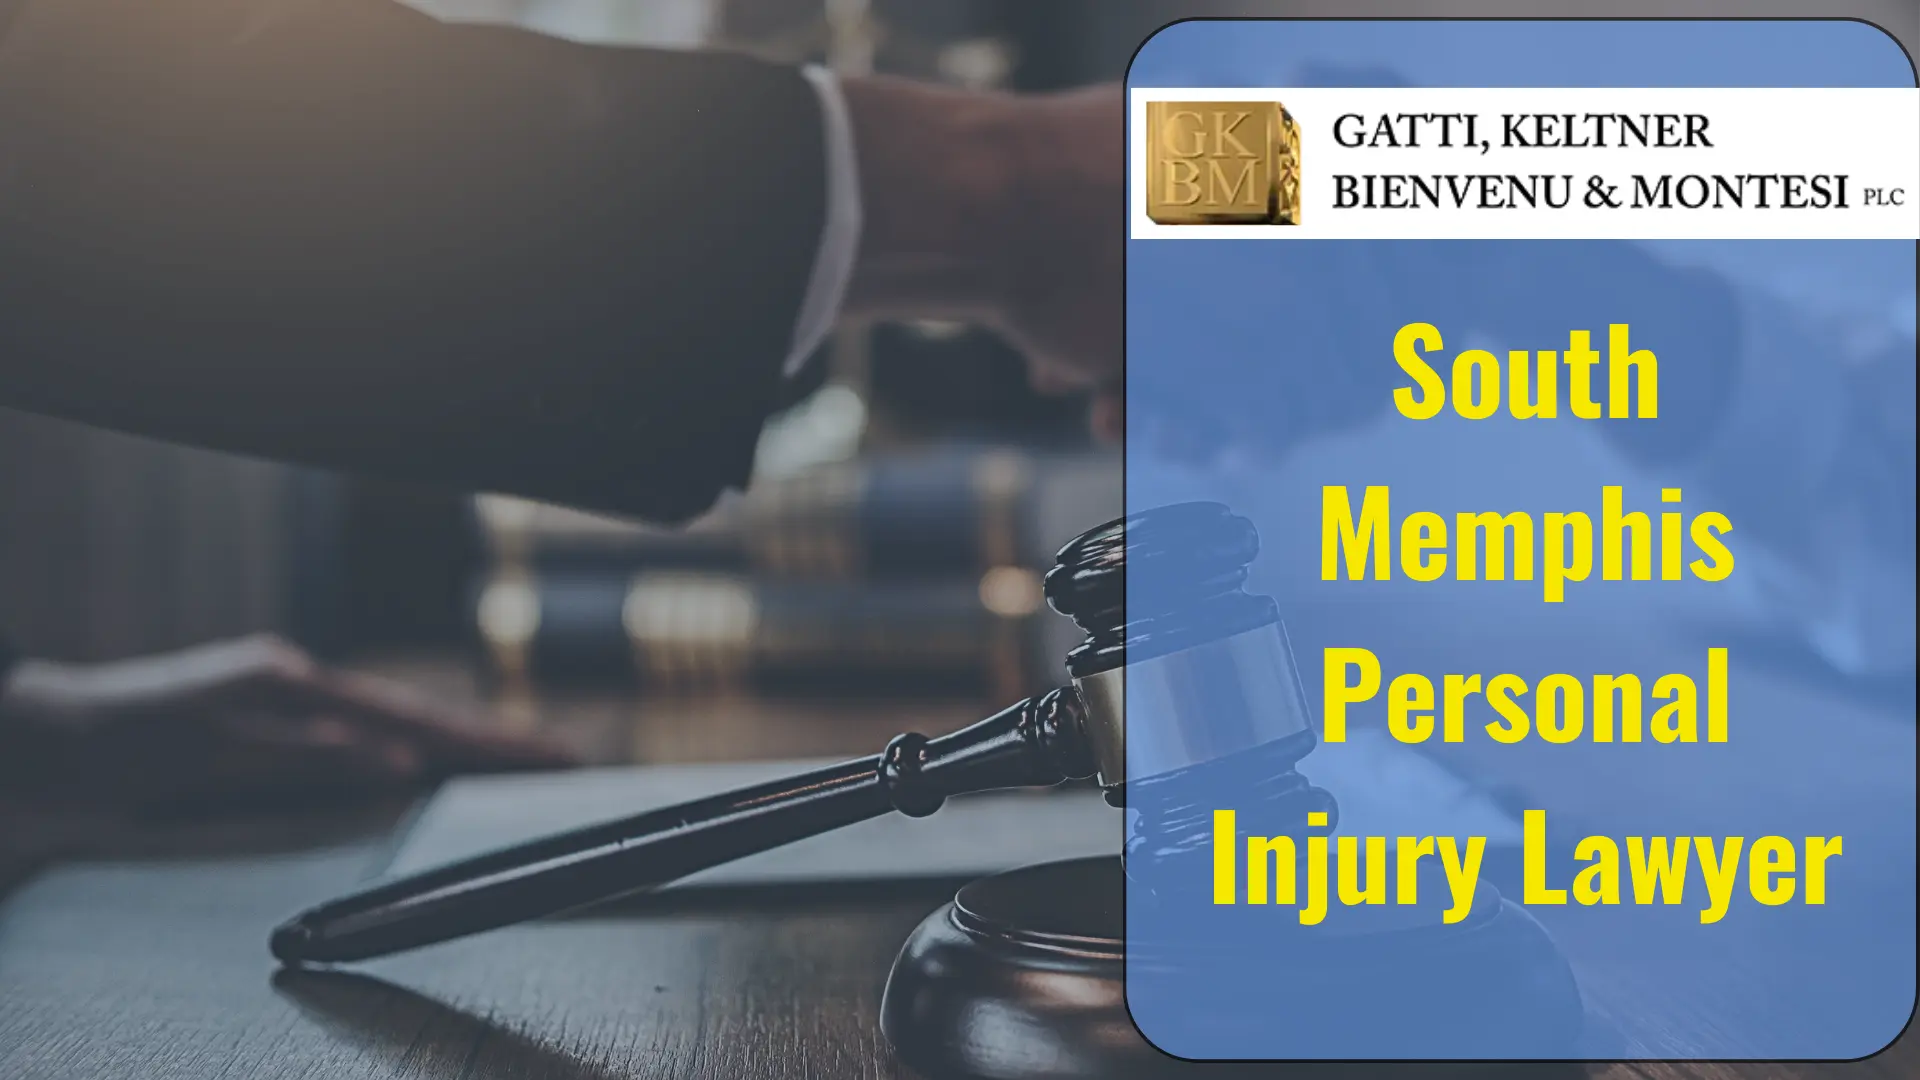 South Memphis Personal Injury Lawyer